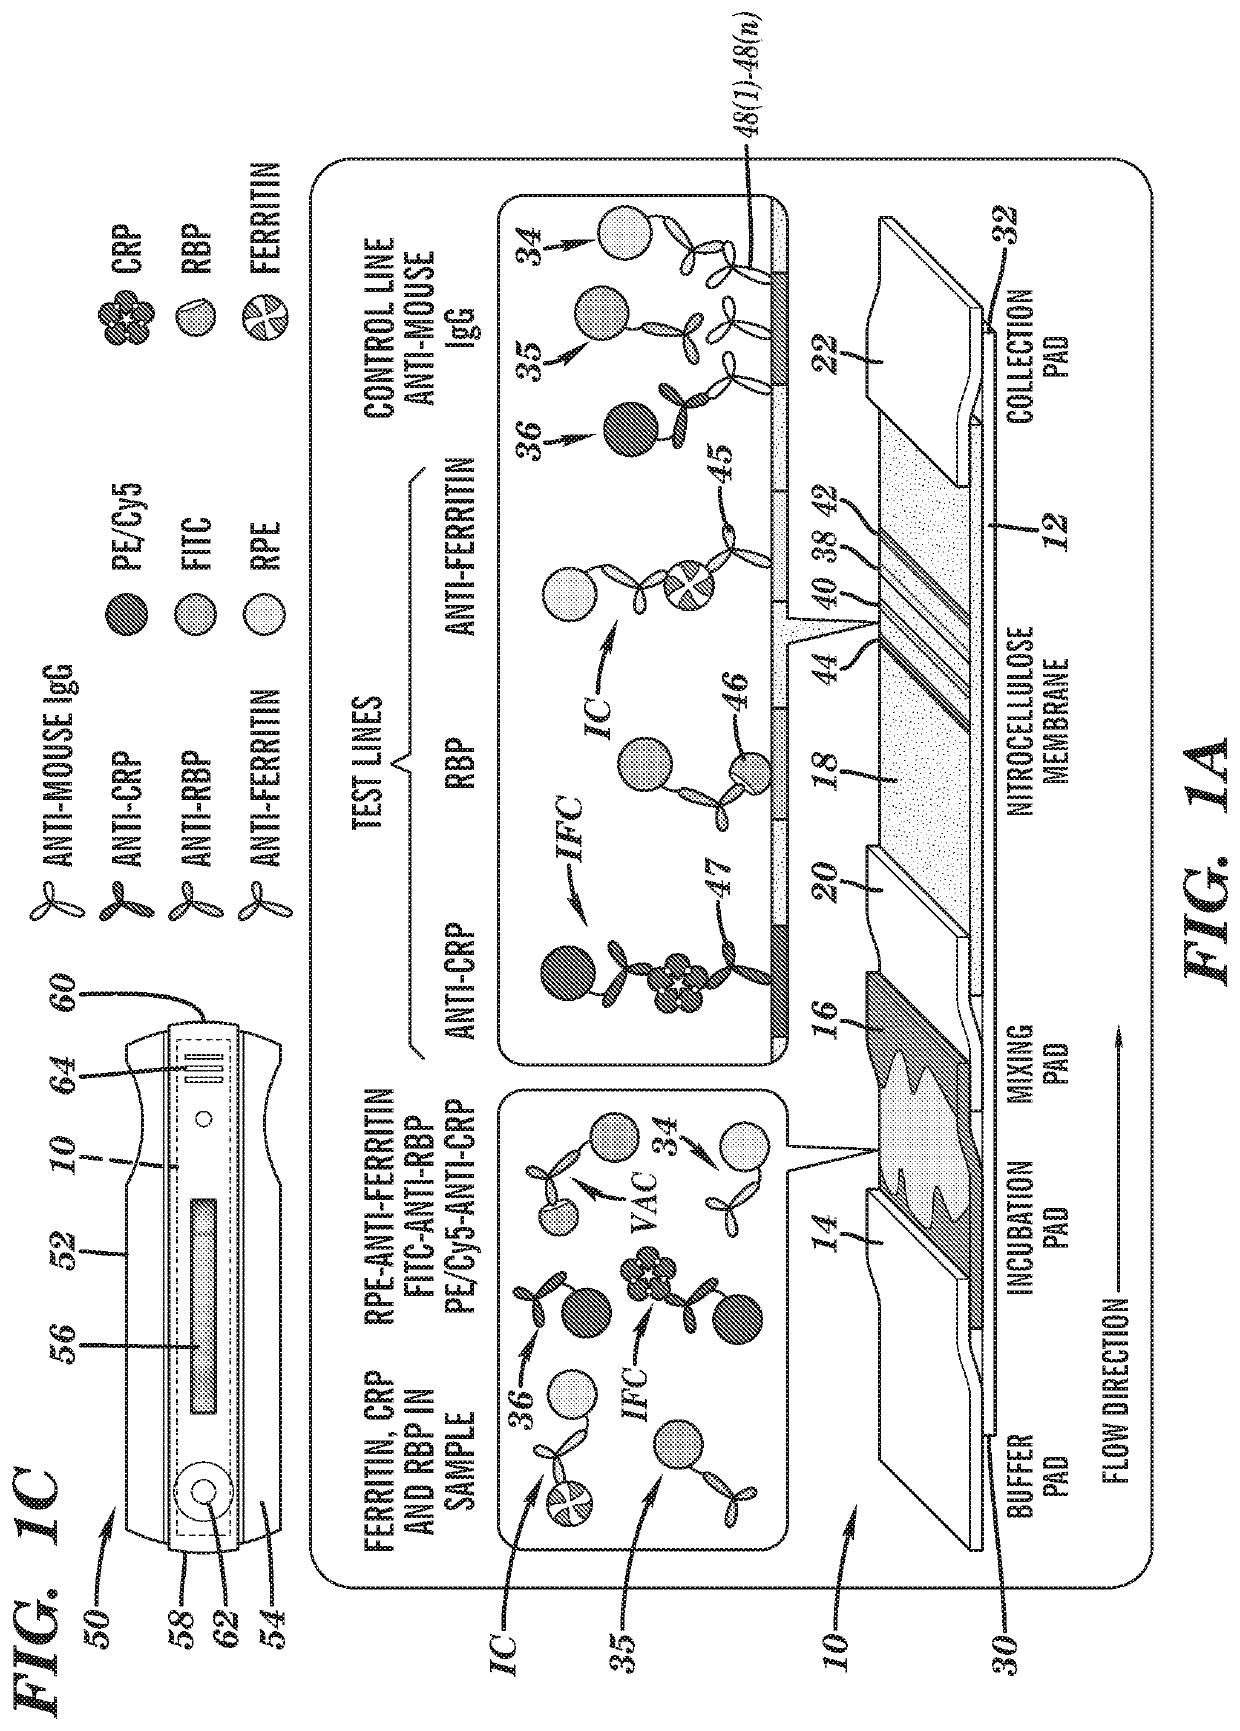 A multiplexed diagnostic assay for iron and vitamin a deficiency and methods of use thereof